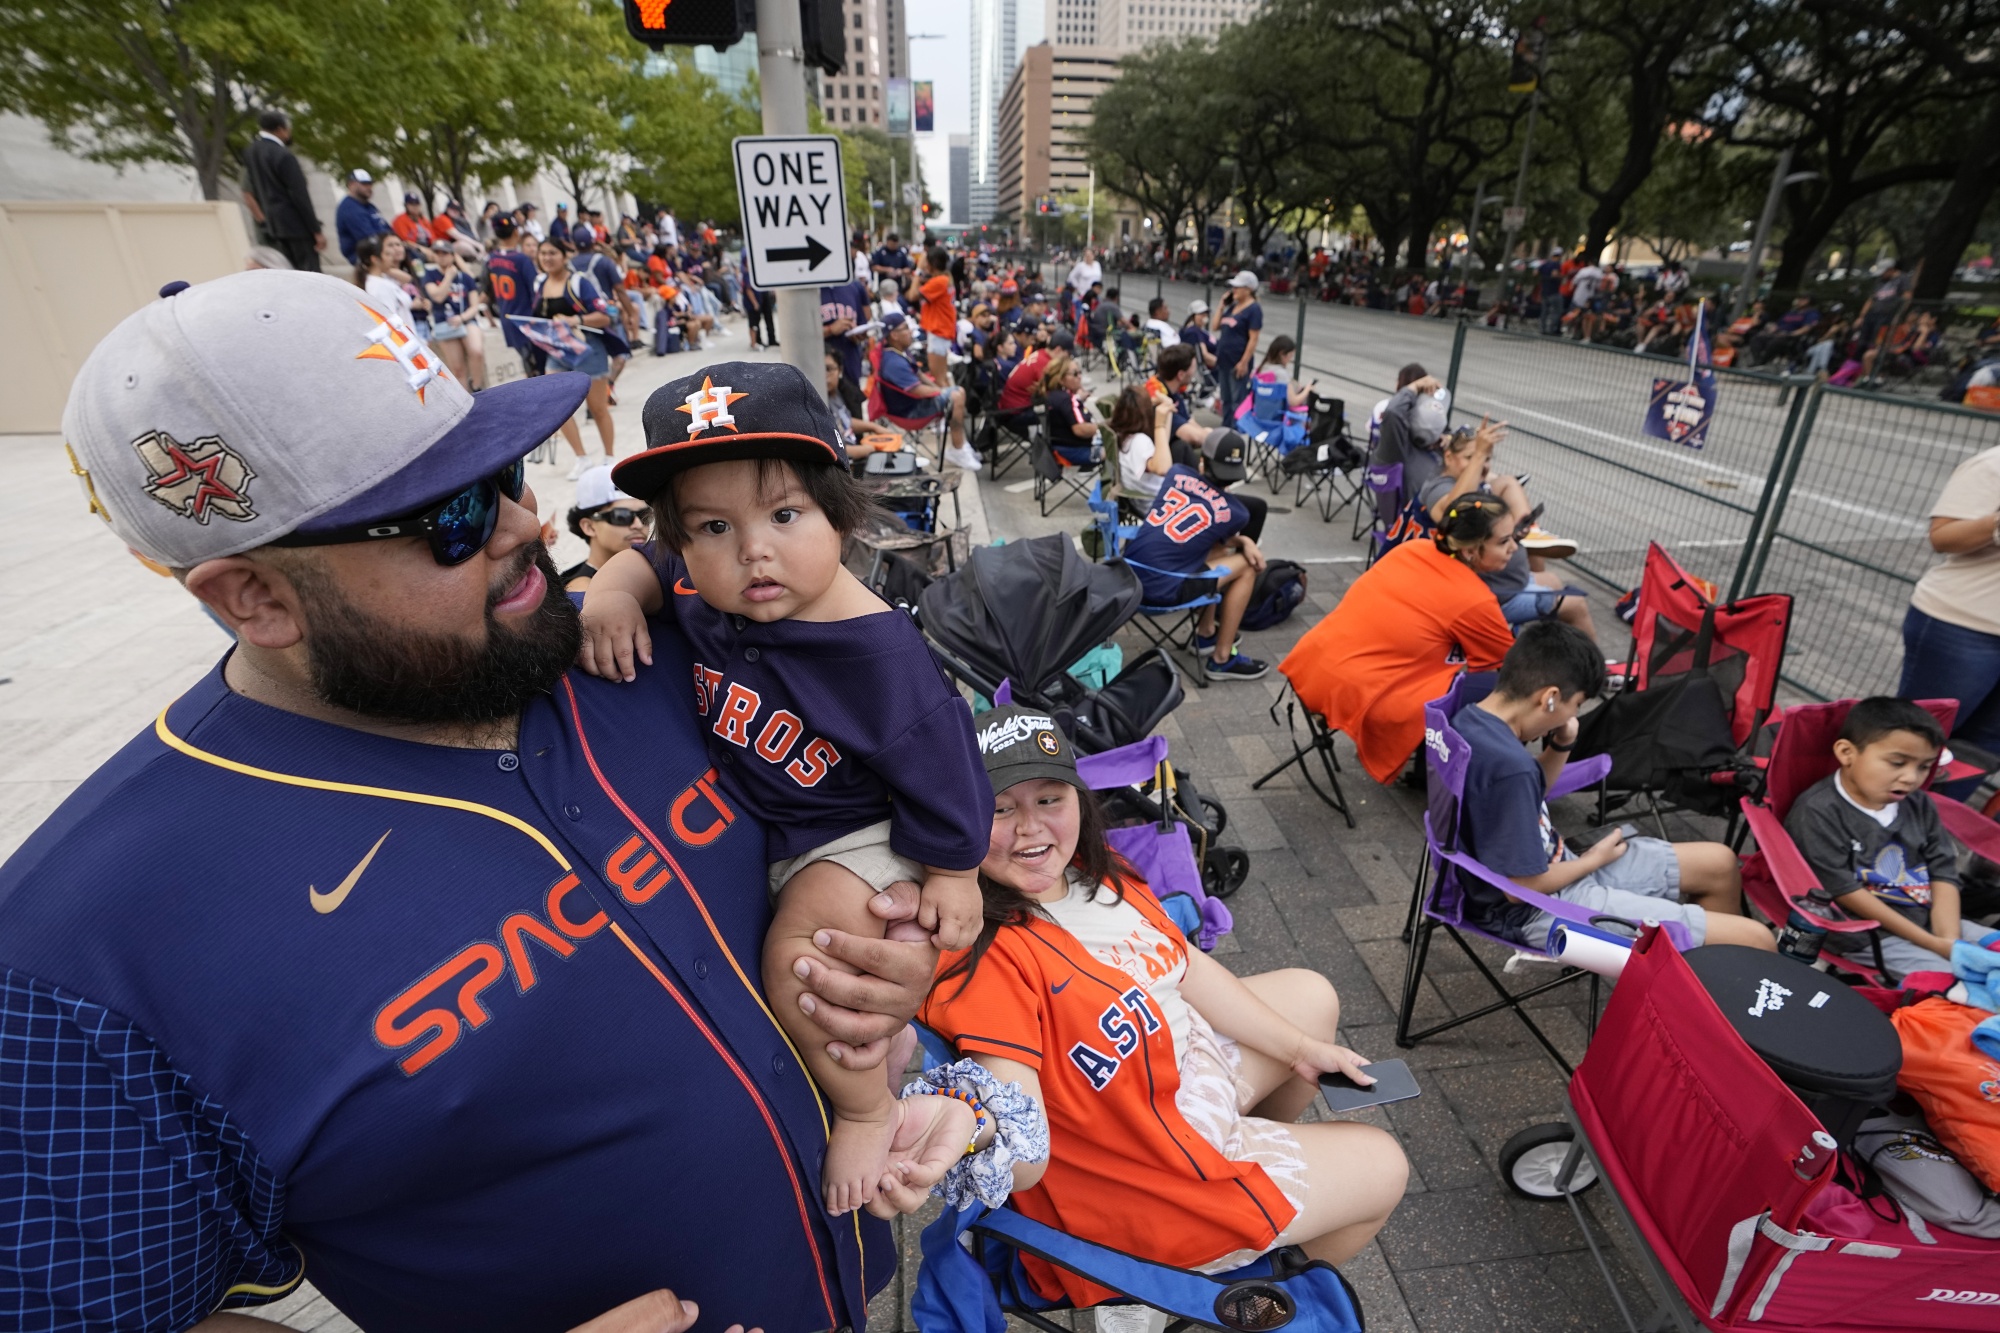 Players' weekend brings out Astros' colorful side